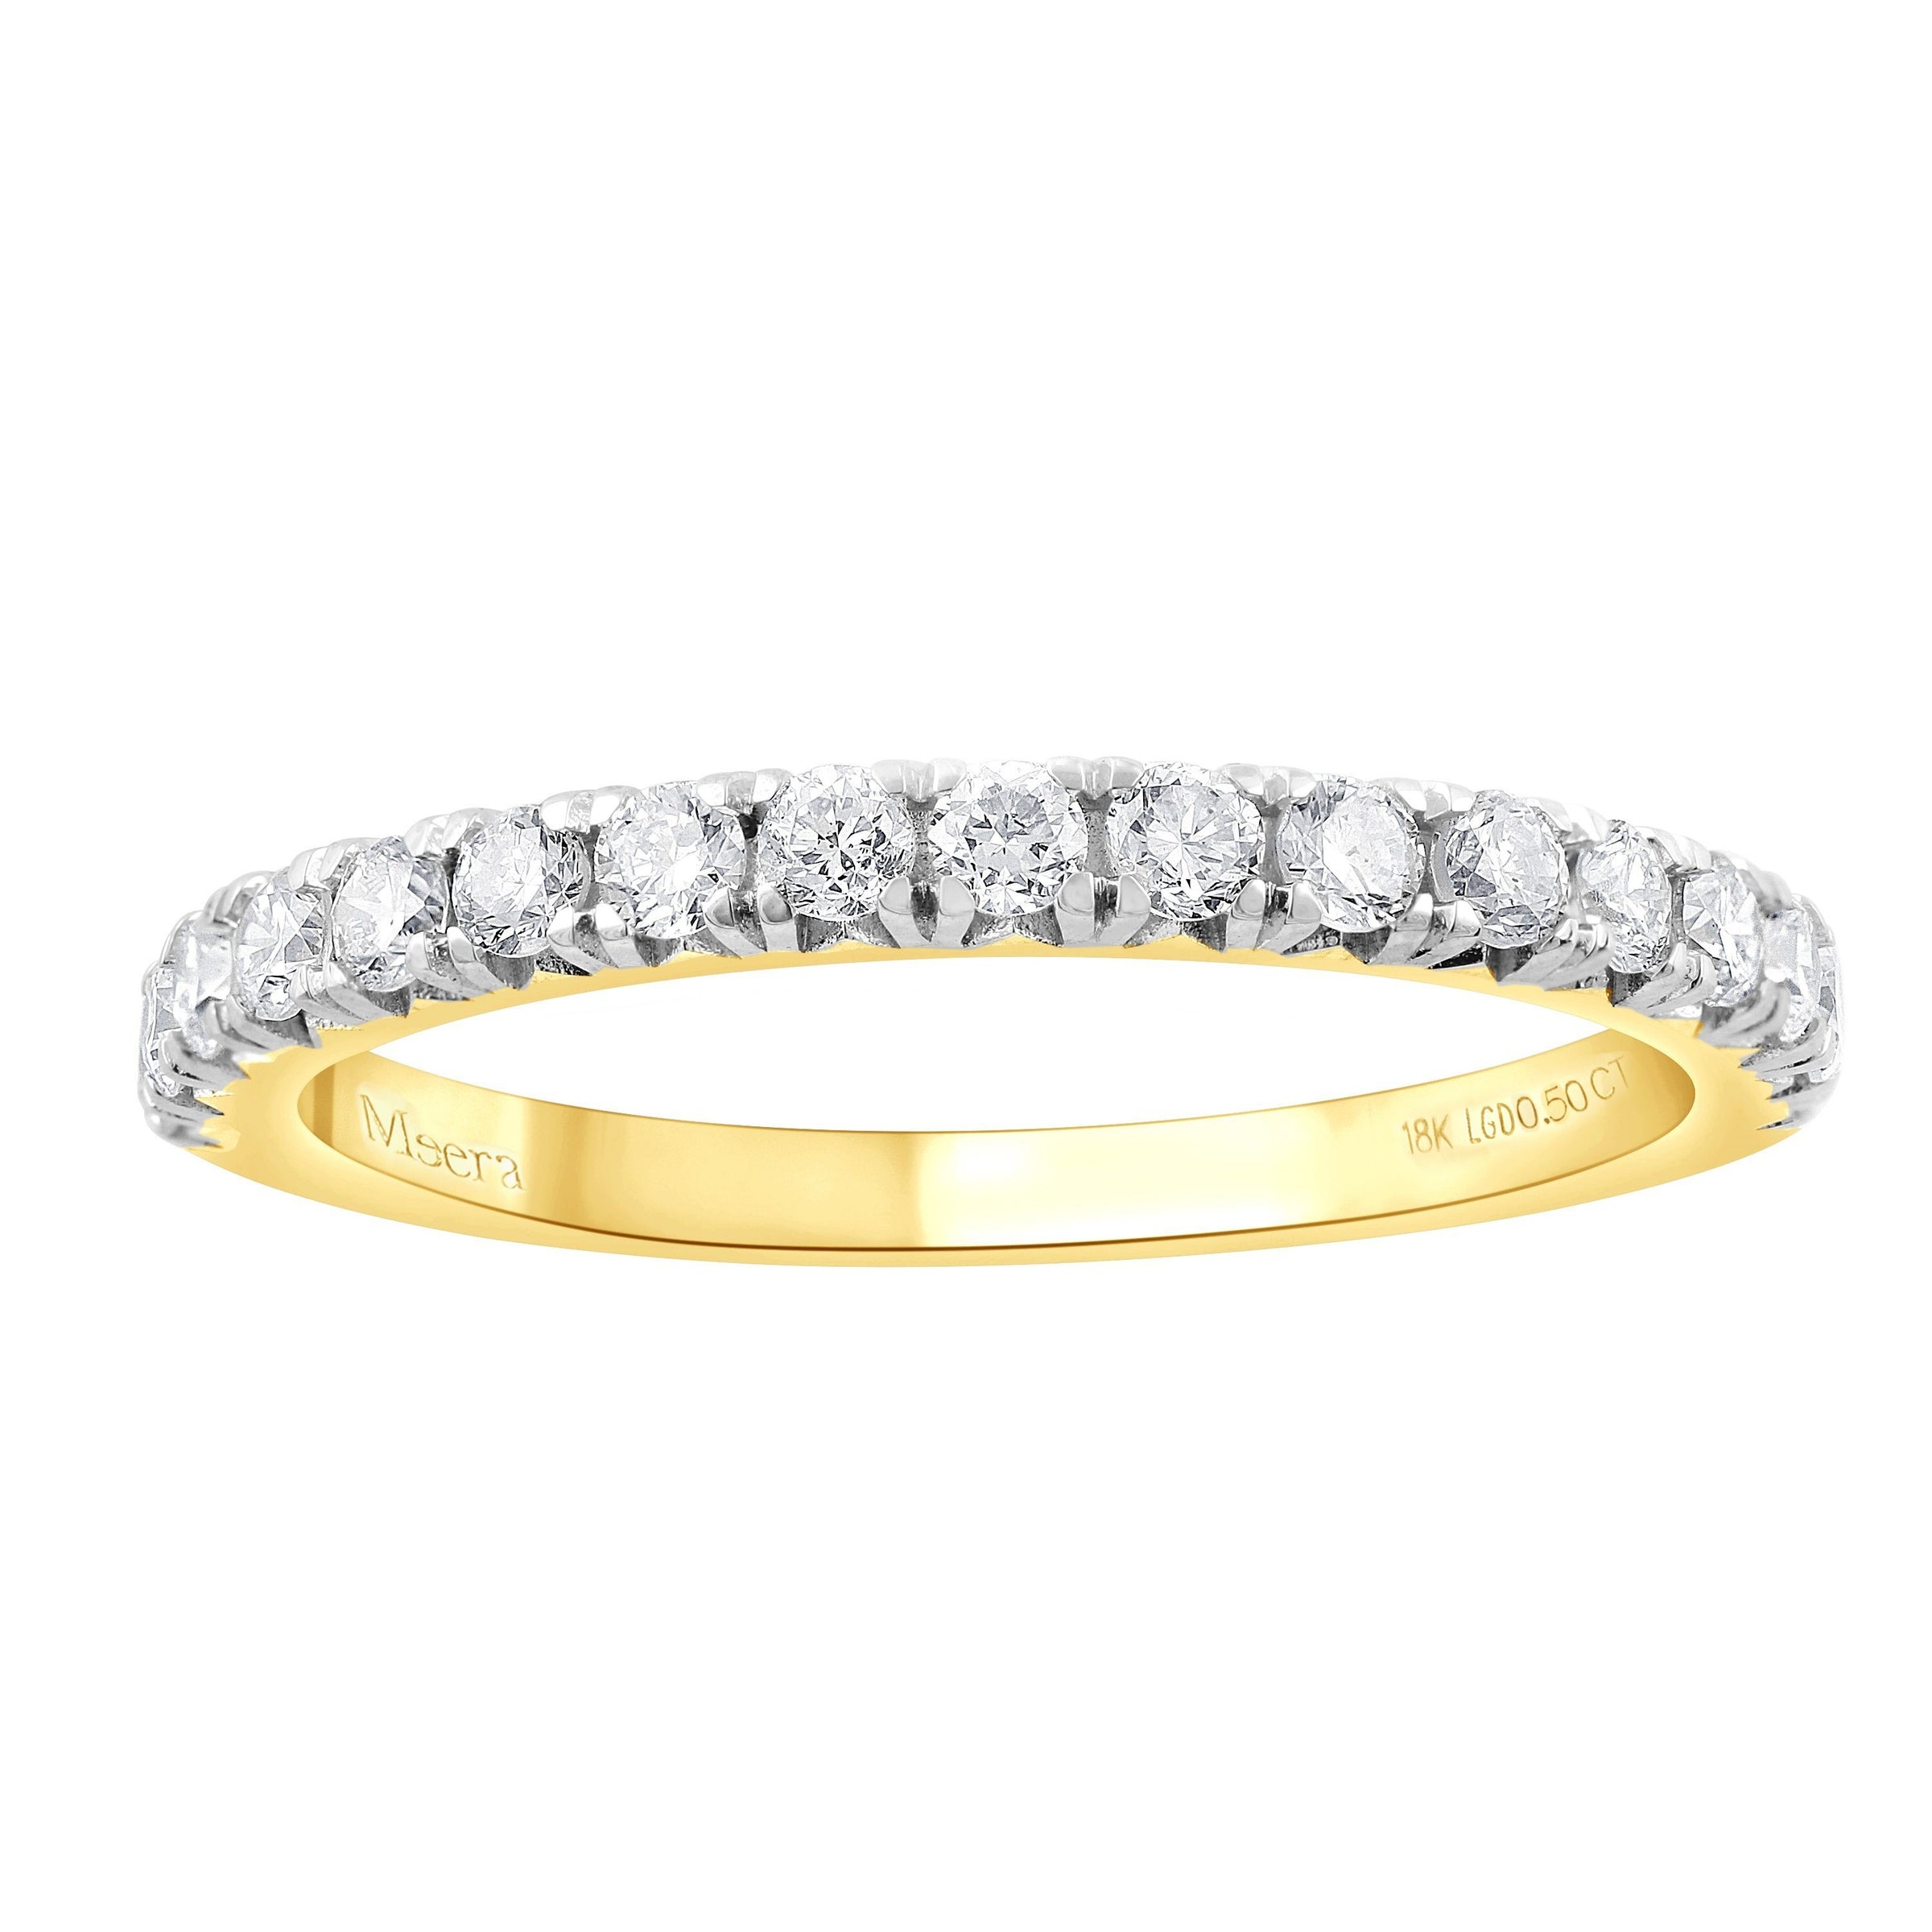 Meera Eternity Ring with 1/2ct of Laboratory Grown Diamonds in 18ct Yellow Gold Rings Meera 